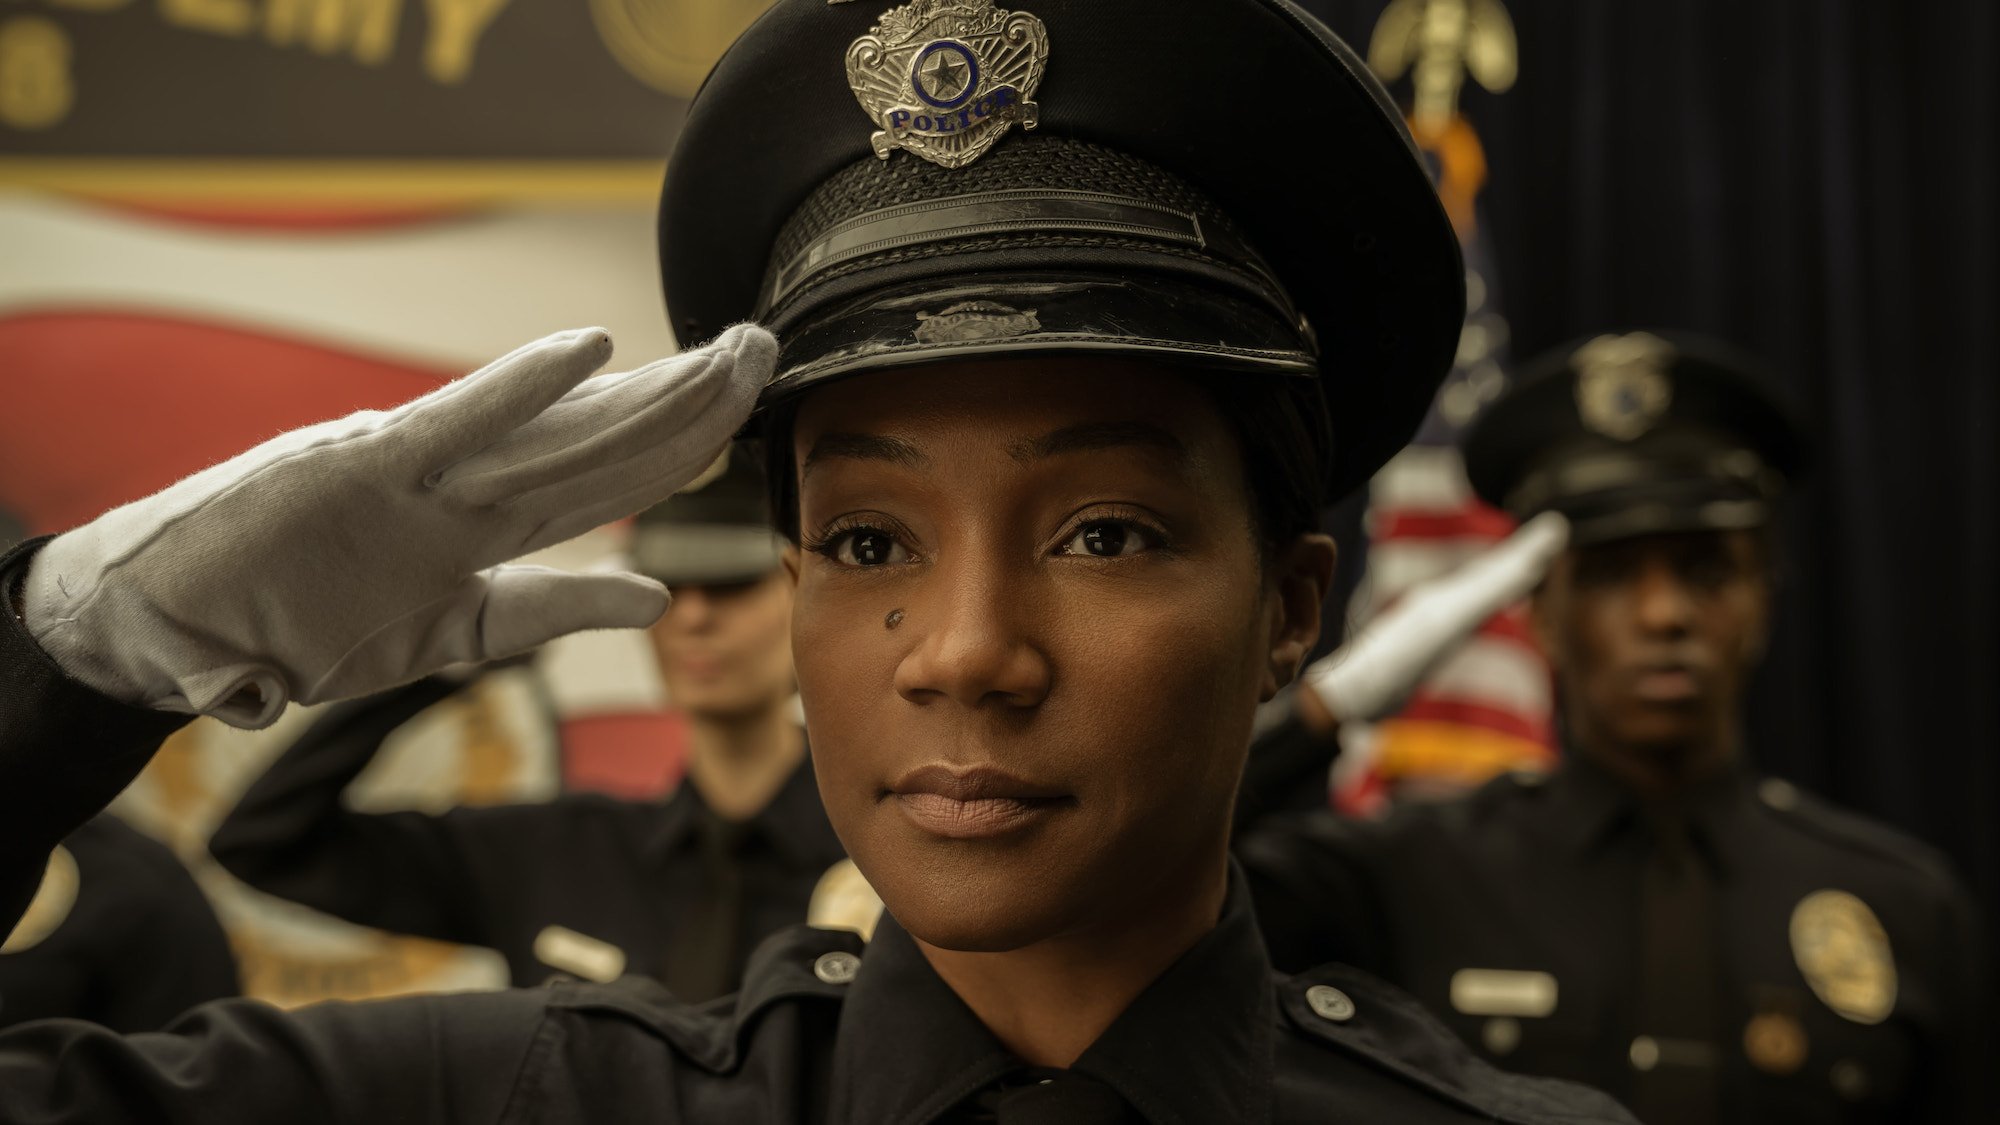 'The Afterparty': Tiffany Haddish as Danvers salutes in police uniform